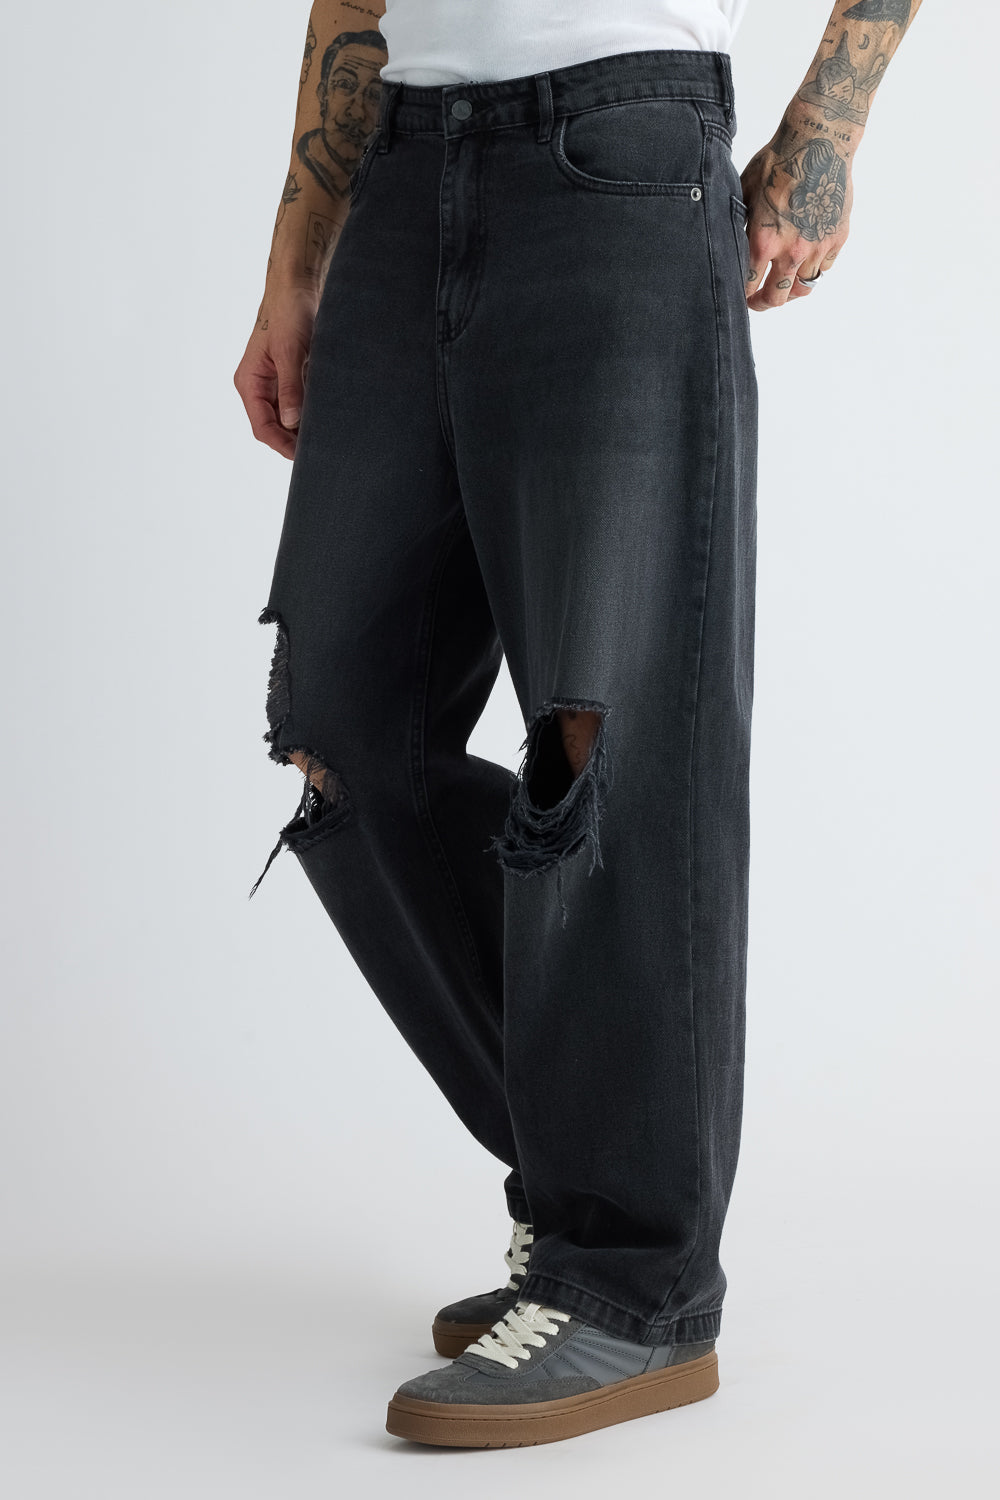 MEN'S CHARCOAL STRAIGHT DISTRESS JEANS